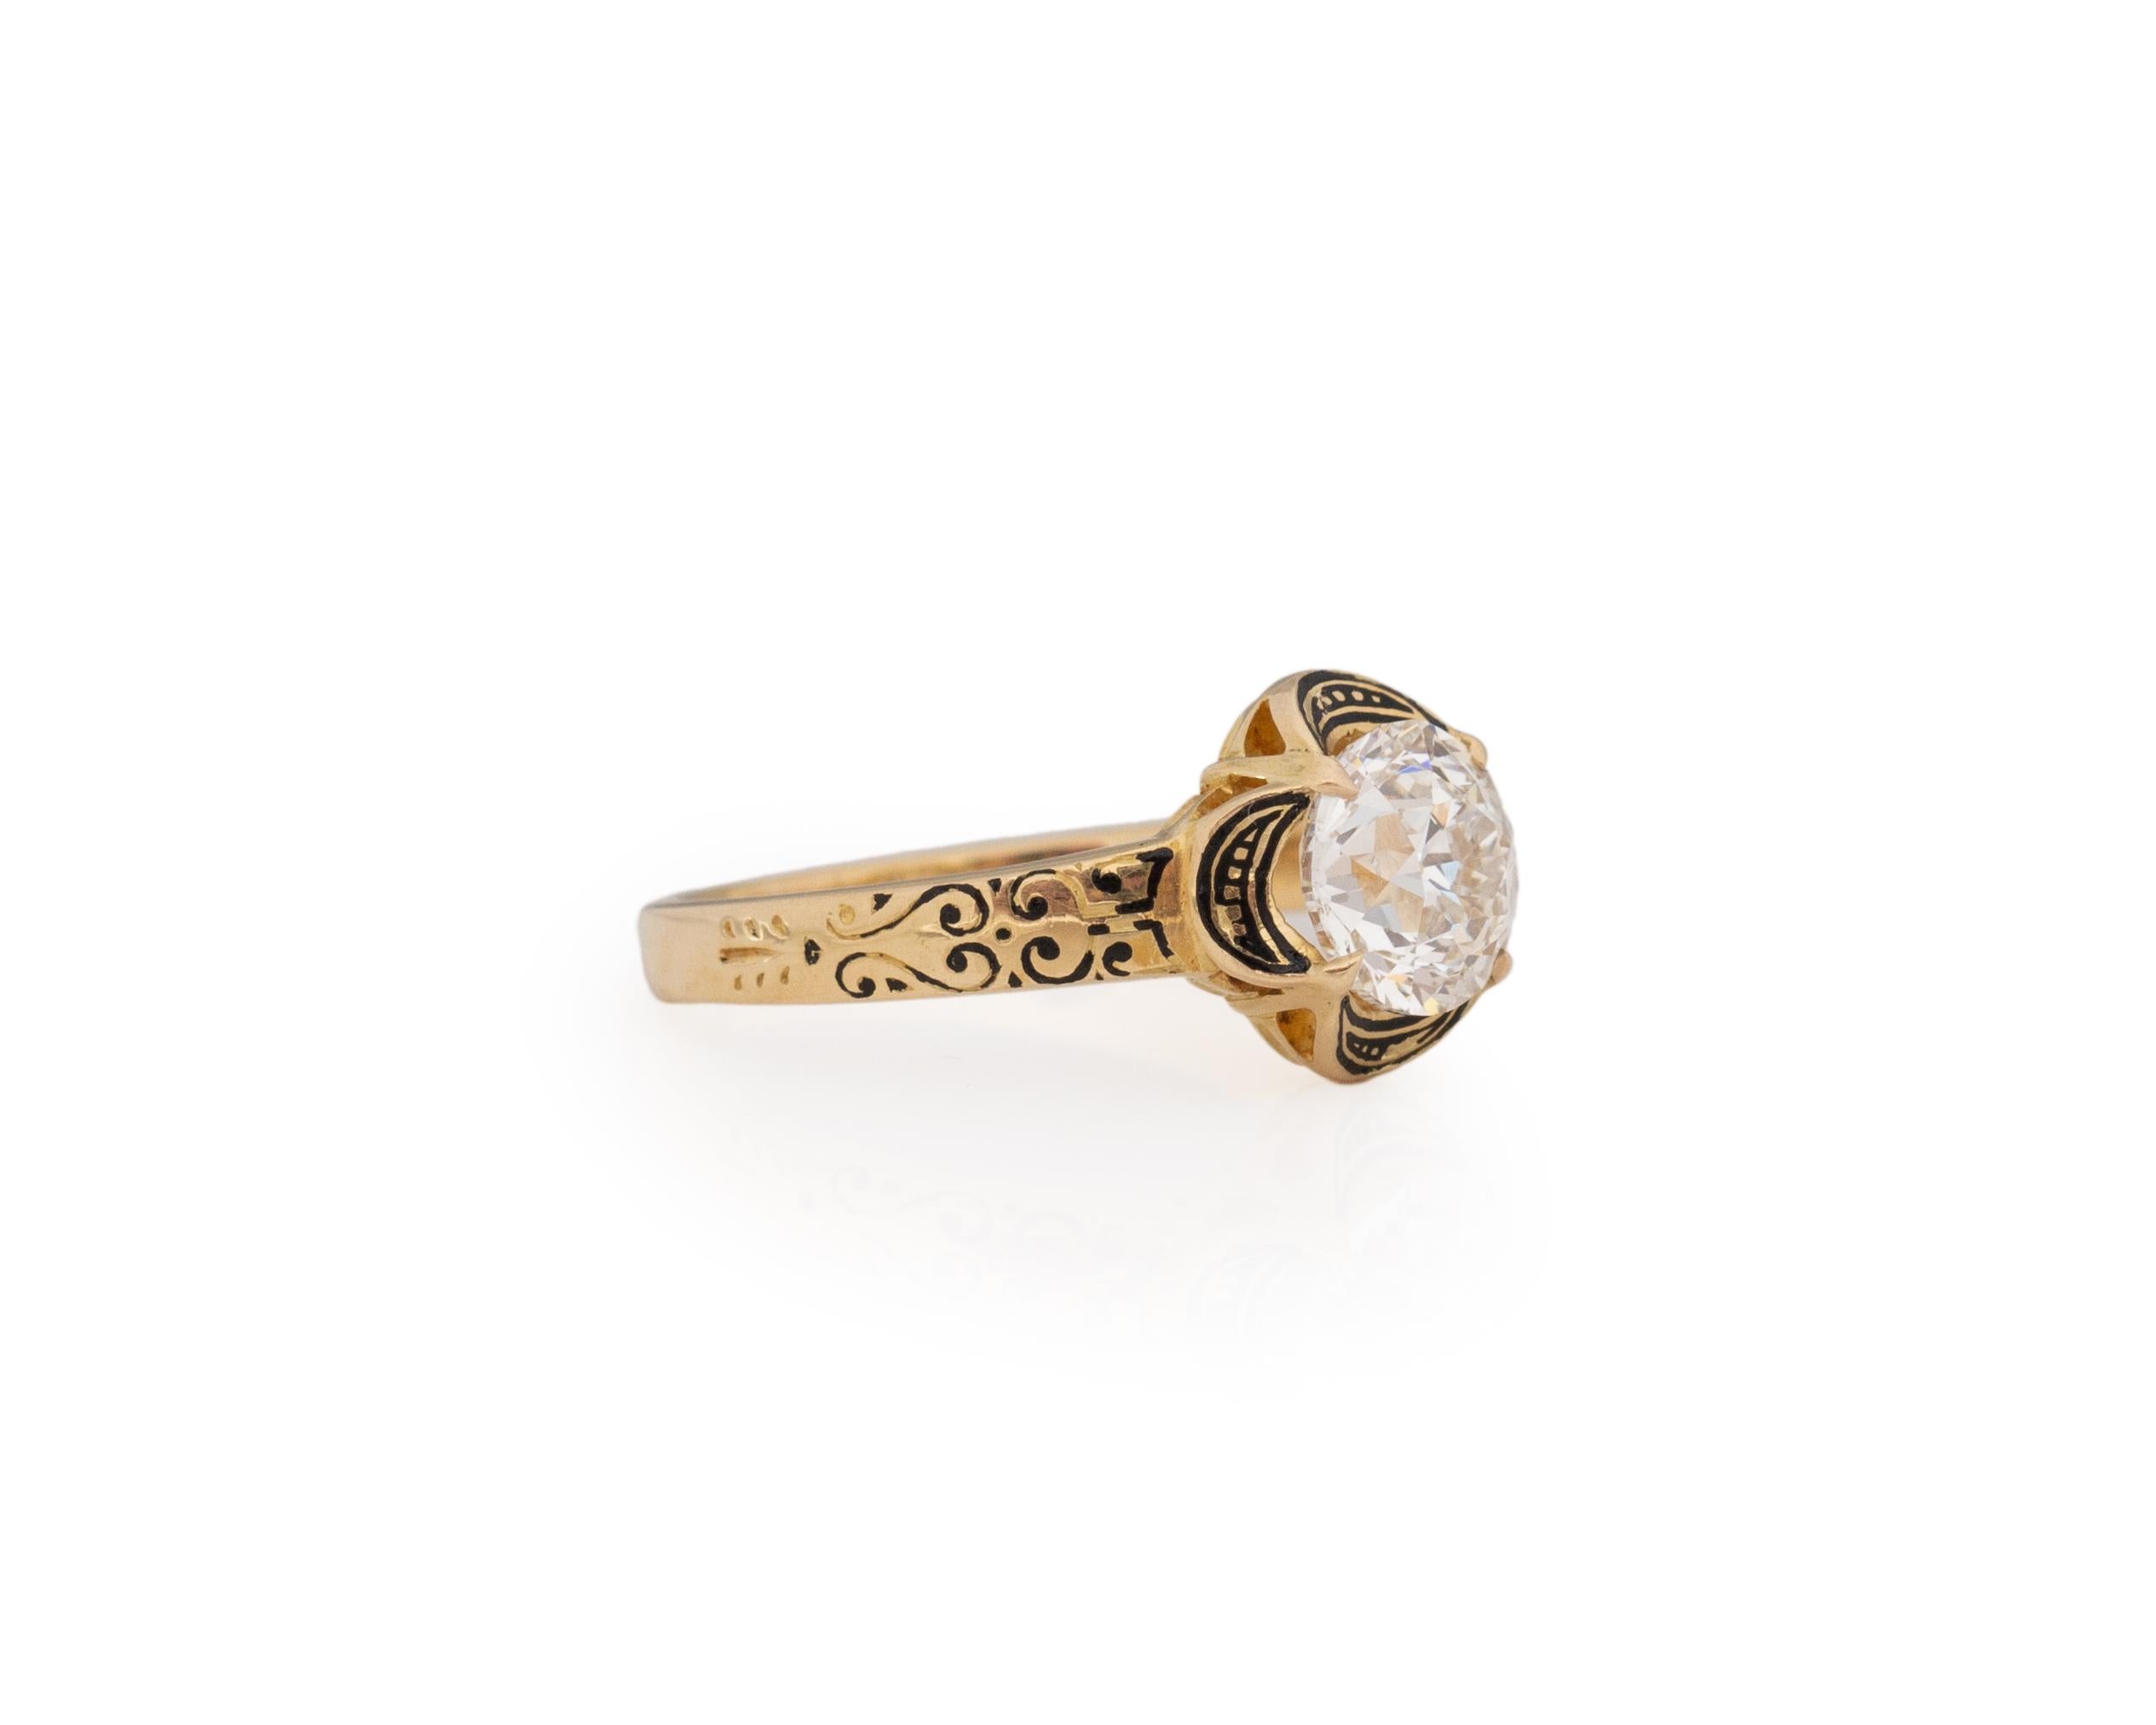 Ring Size: 6.25
Metal Type: 14K Yellow Gold [Hallmarked, and Tested]
Weight: 3.4 grams

Center Diamond Details:
GIA REPORT #: 5221633021
Weight: 1.37ct
Cut: Old European brilliant
Color: I
Clarity: SI1
Measurements: 6.80mm x 6.88mm x 4.62mm

Finger